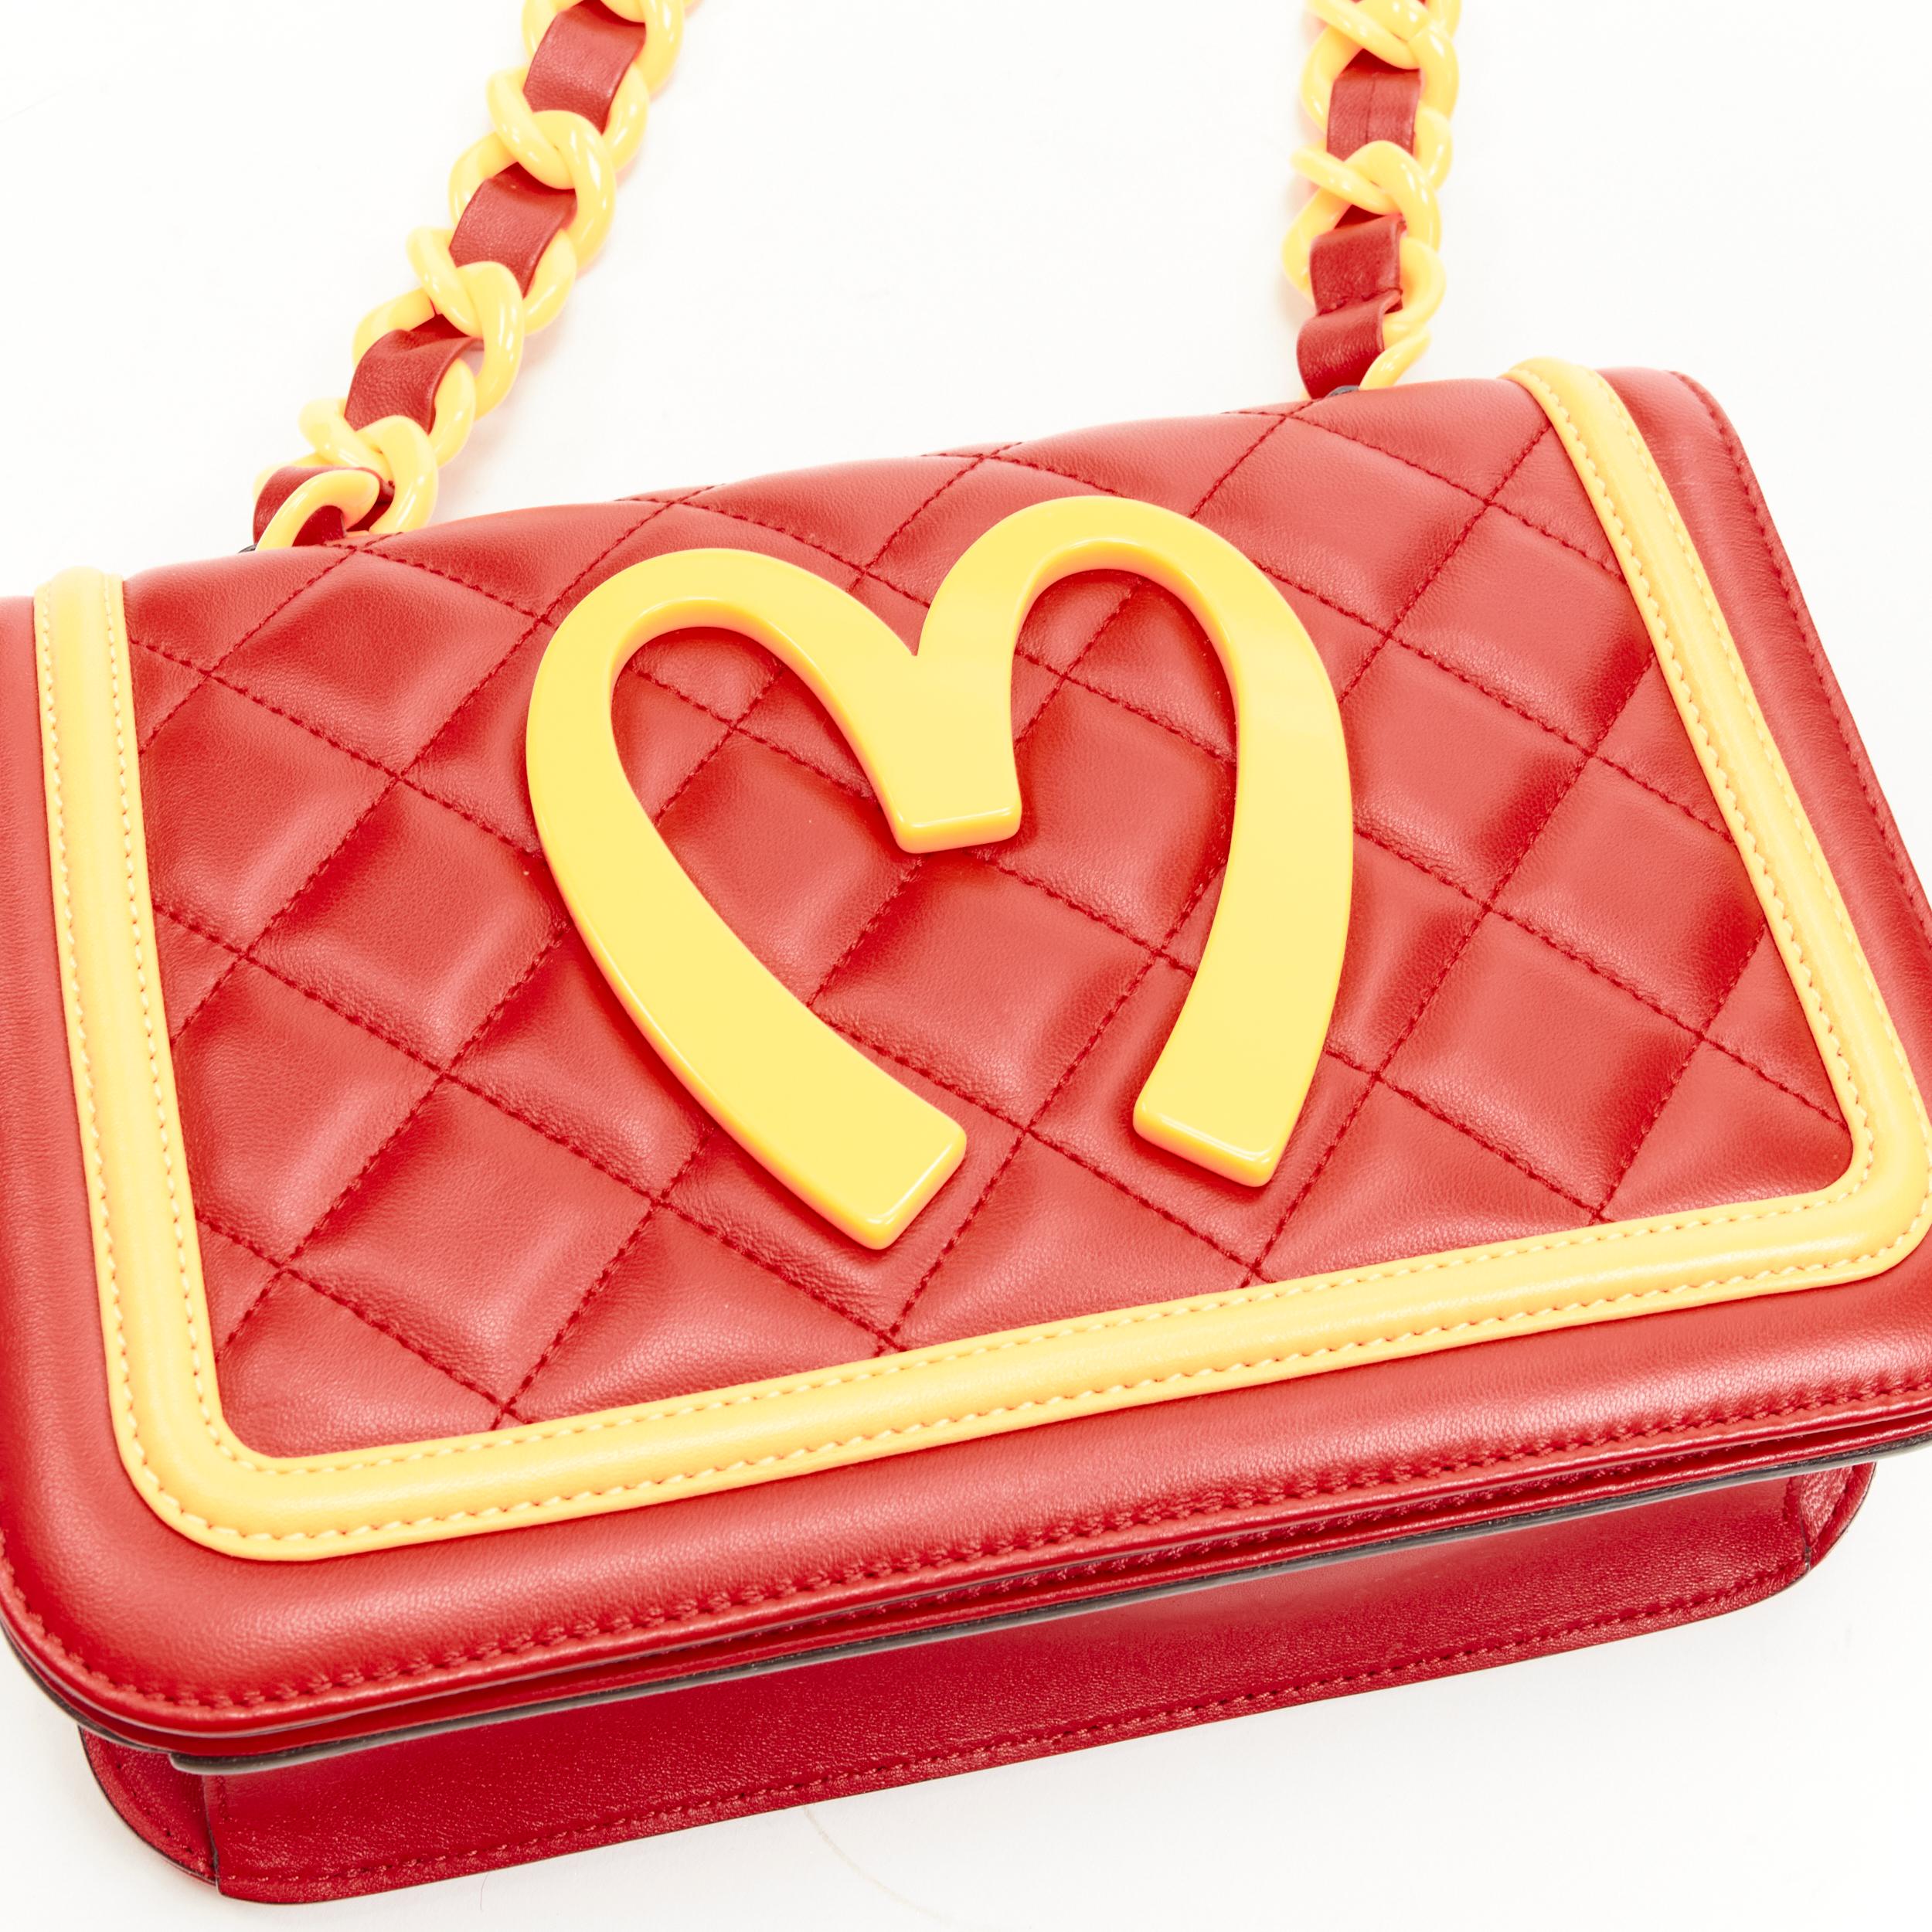 Women's MOSCHINO 2014 Runway Mcdonalds Fast Food red yellow quilted crossbody flap bag